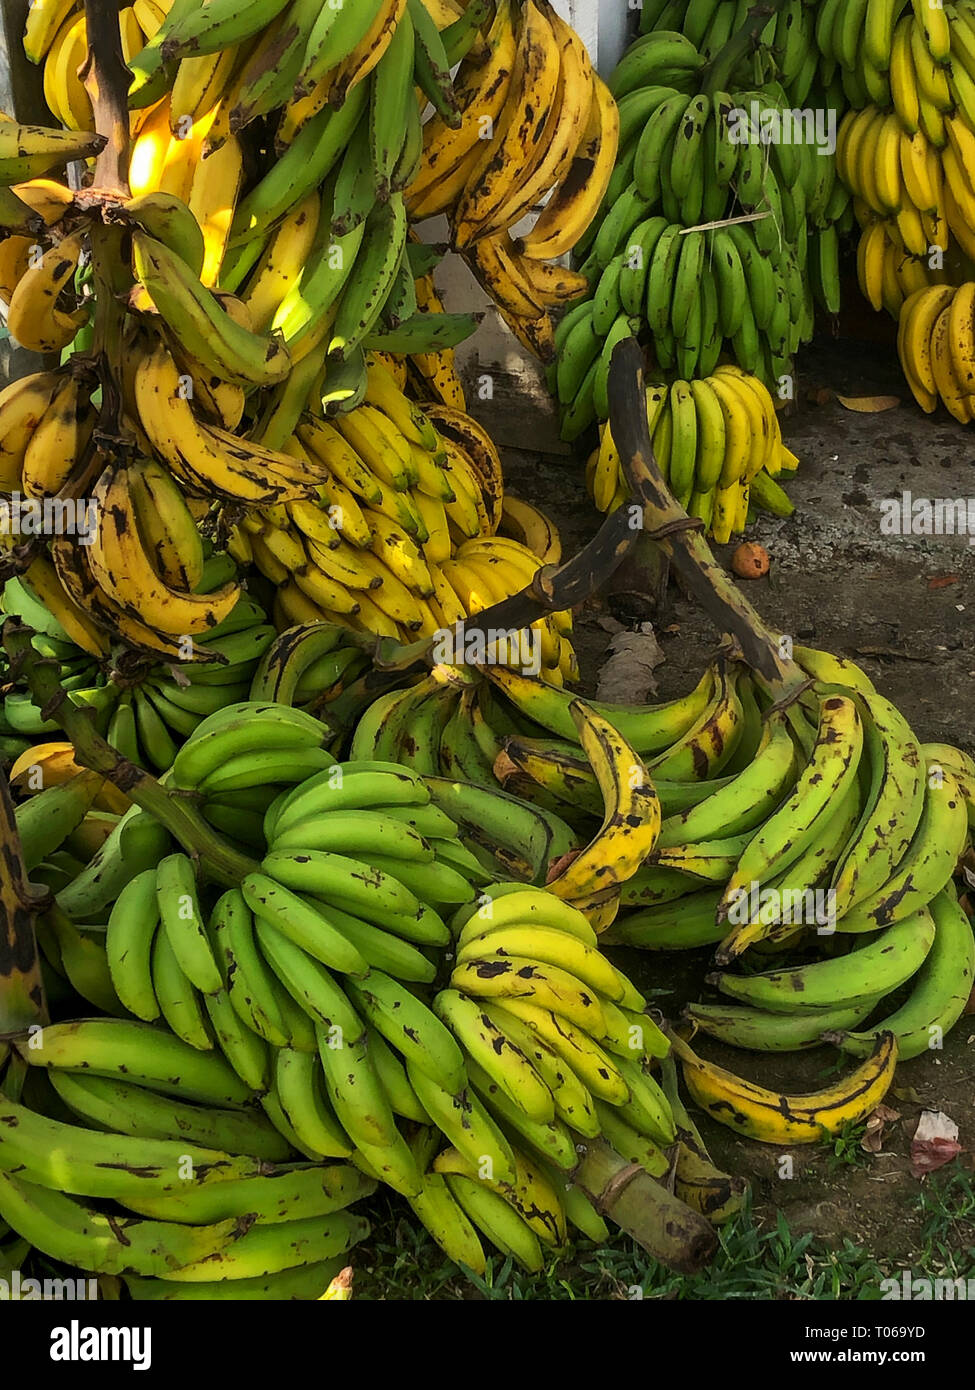 https://c8.alamy.com/comp/T069YD/bunches-of-bananas-are-stacked-up-in-piles-awaiting-their-turn-at-the-farmers-stand-T069YD.jpg